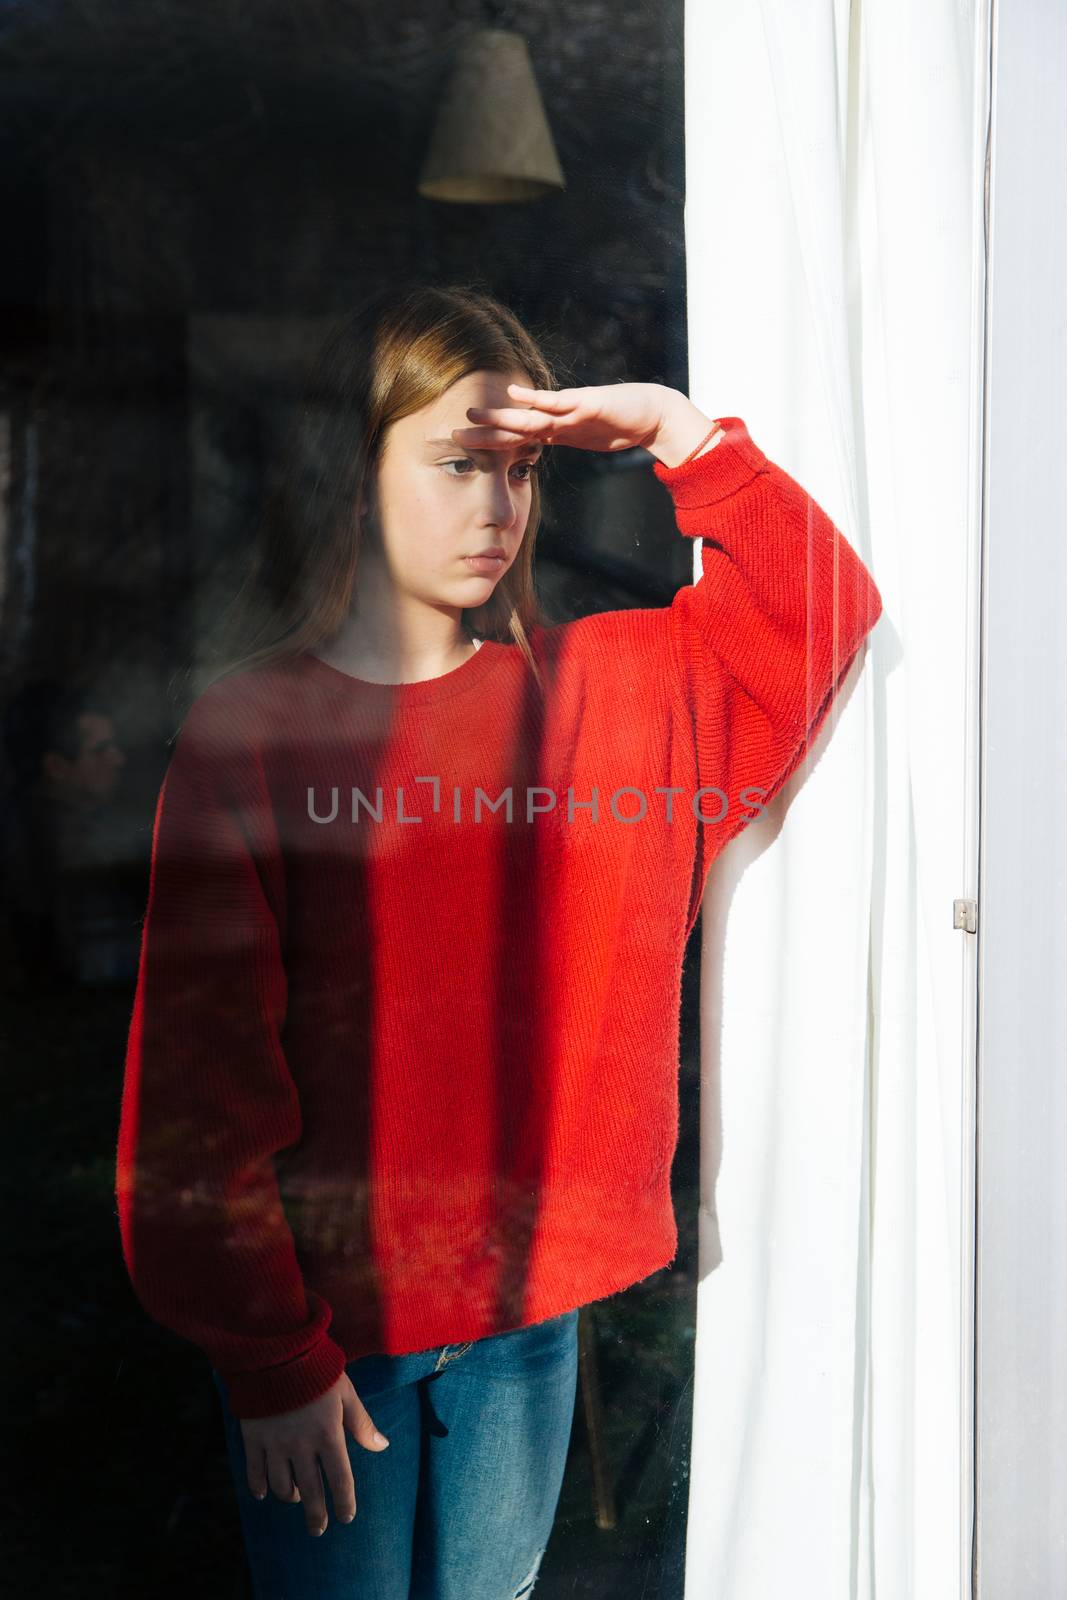 A sad and depressed cute little girl alone near the window. Outdoor portrait of a sad teenage girl.